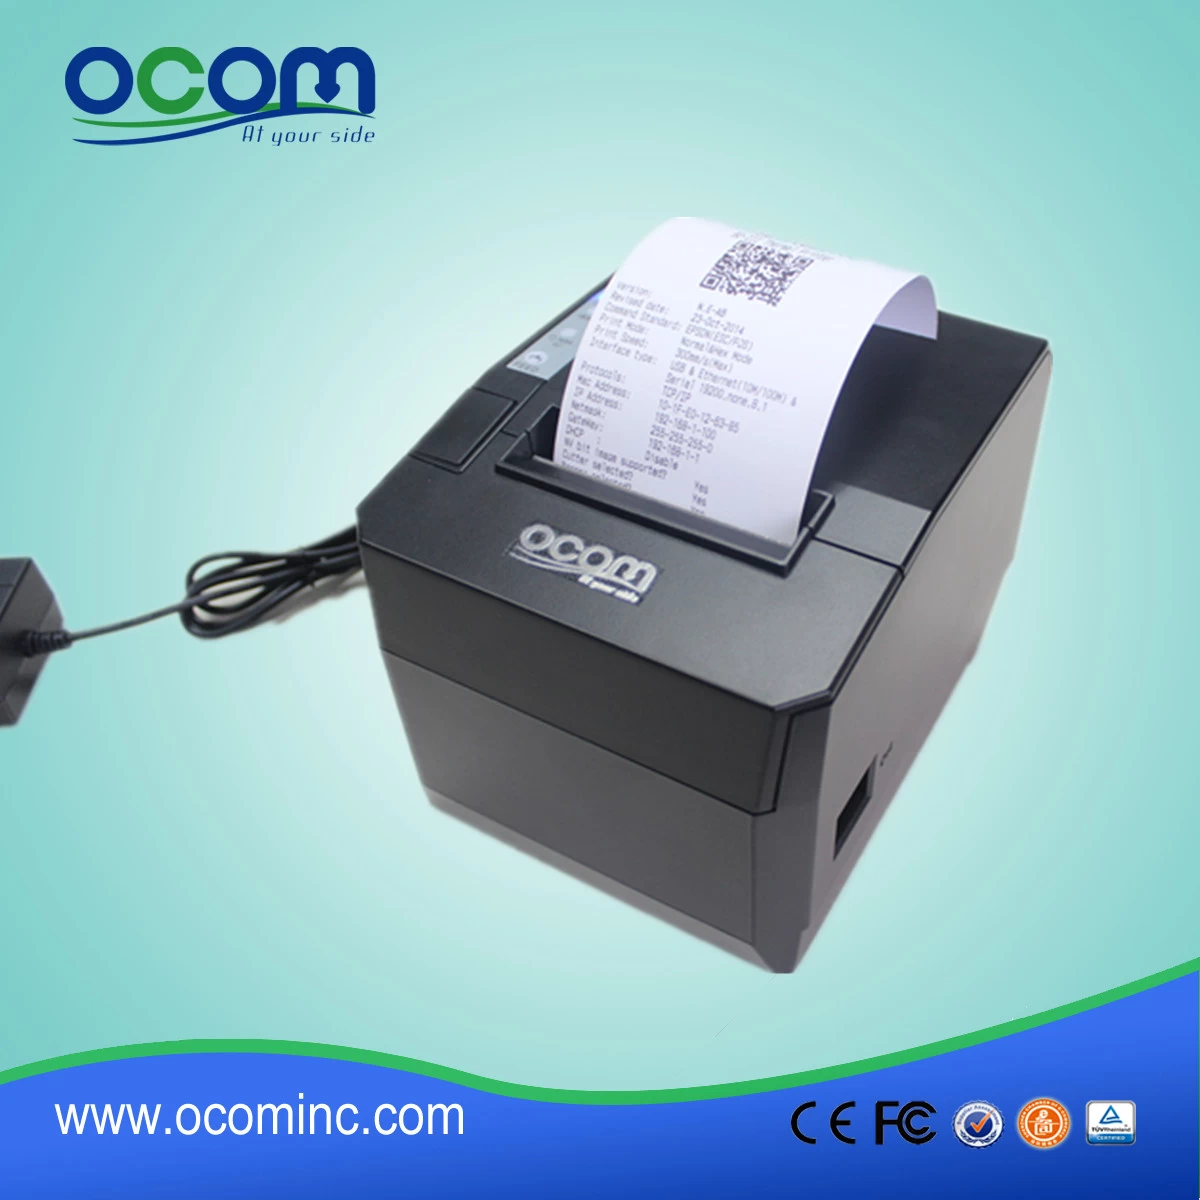 OCPP-88A-URL 80mm bluetooth thermal printer with auto cutter For android